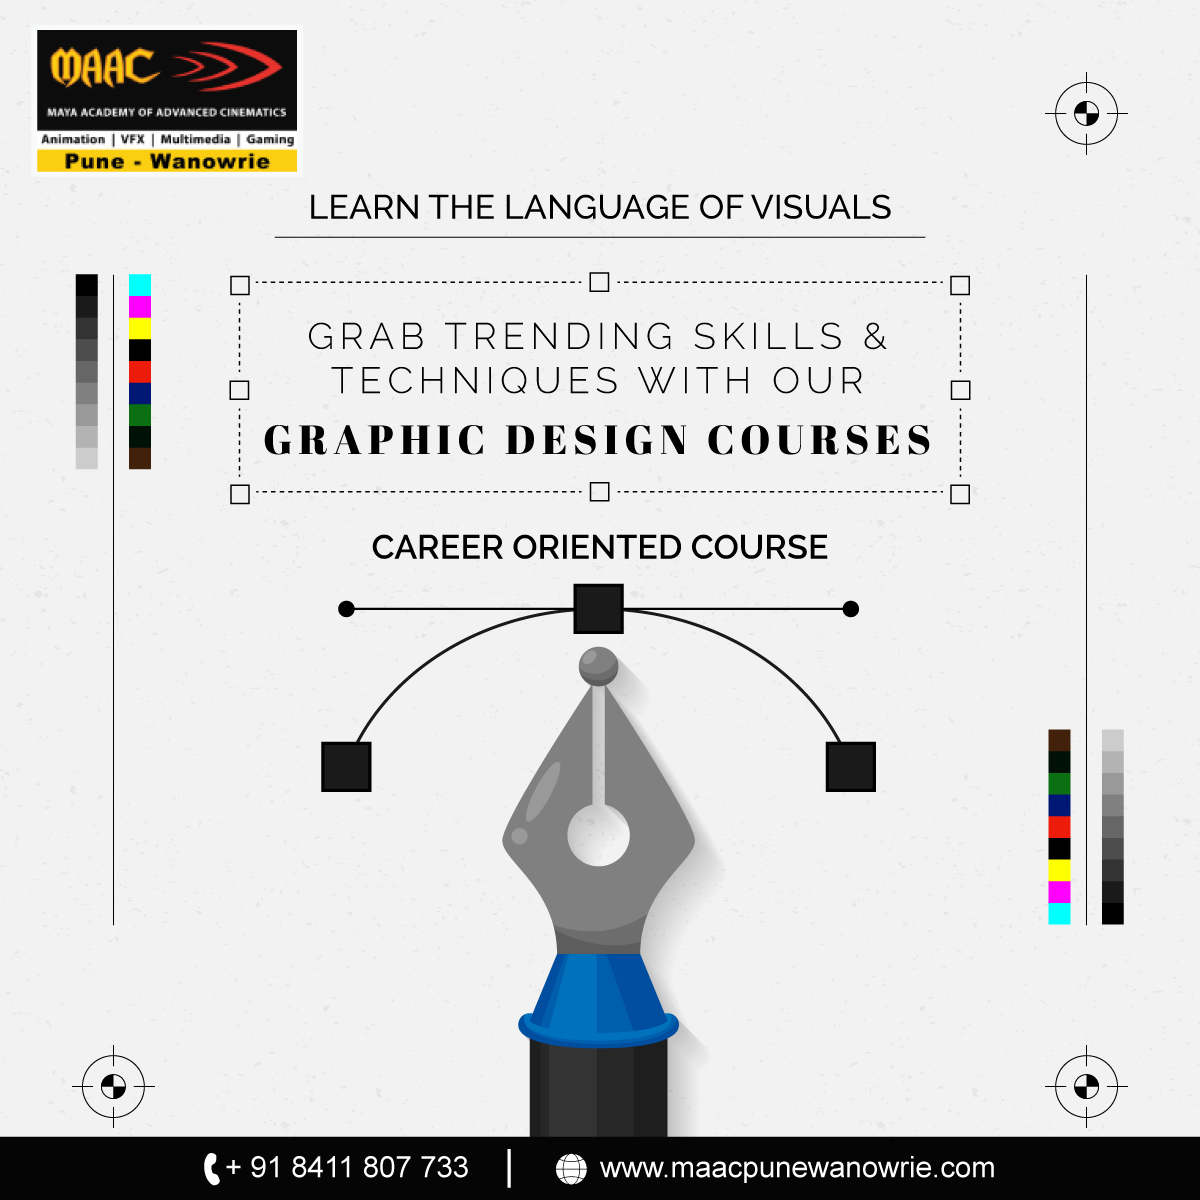 Learn Photoshop, Illustrator, and InDesign by creating posters, logos, and more
Admission OPEN for 2023-2024
Click on : bit.ly/3e9xpEu
#graphicdesign #graphicdesigncourse  #illustrator #photoshop  #onlinelearning #MAACCourses #design #vector #brandidentity #logos